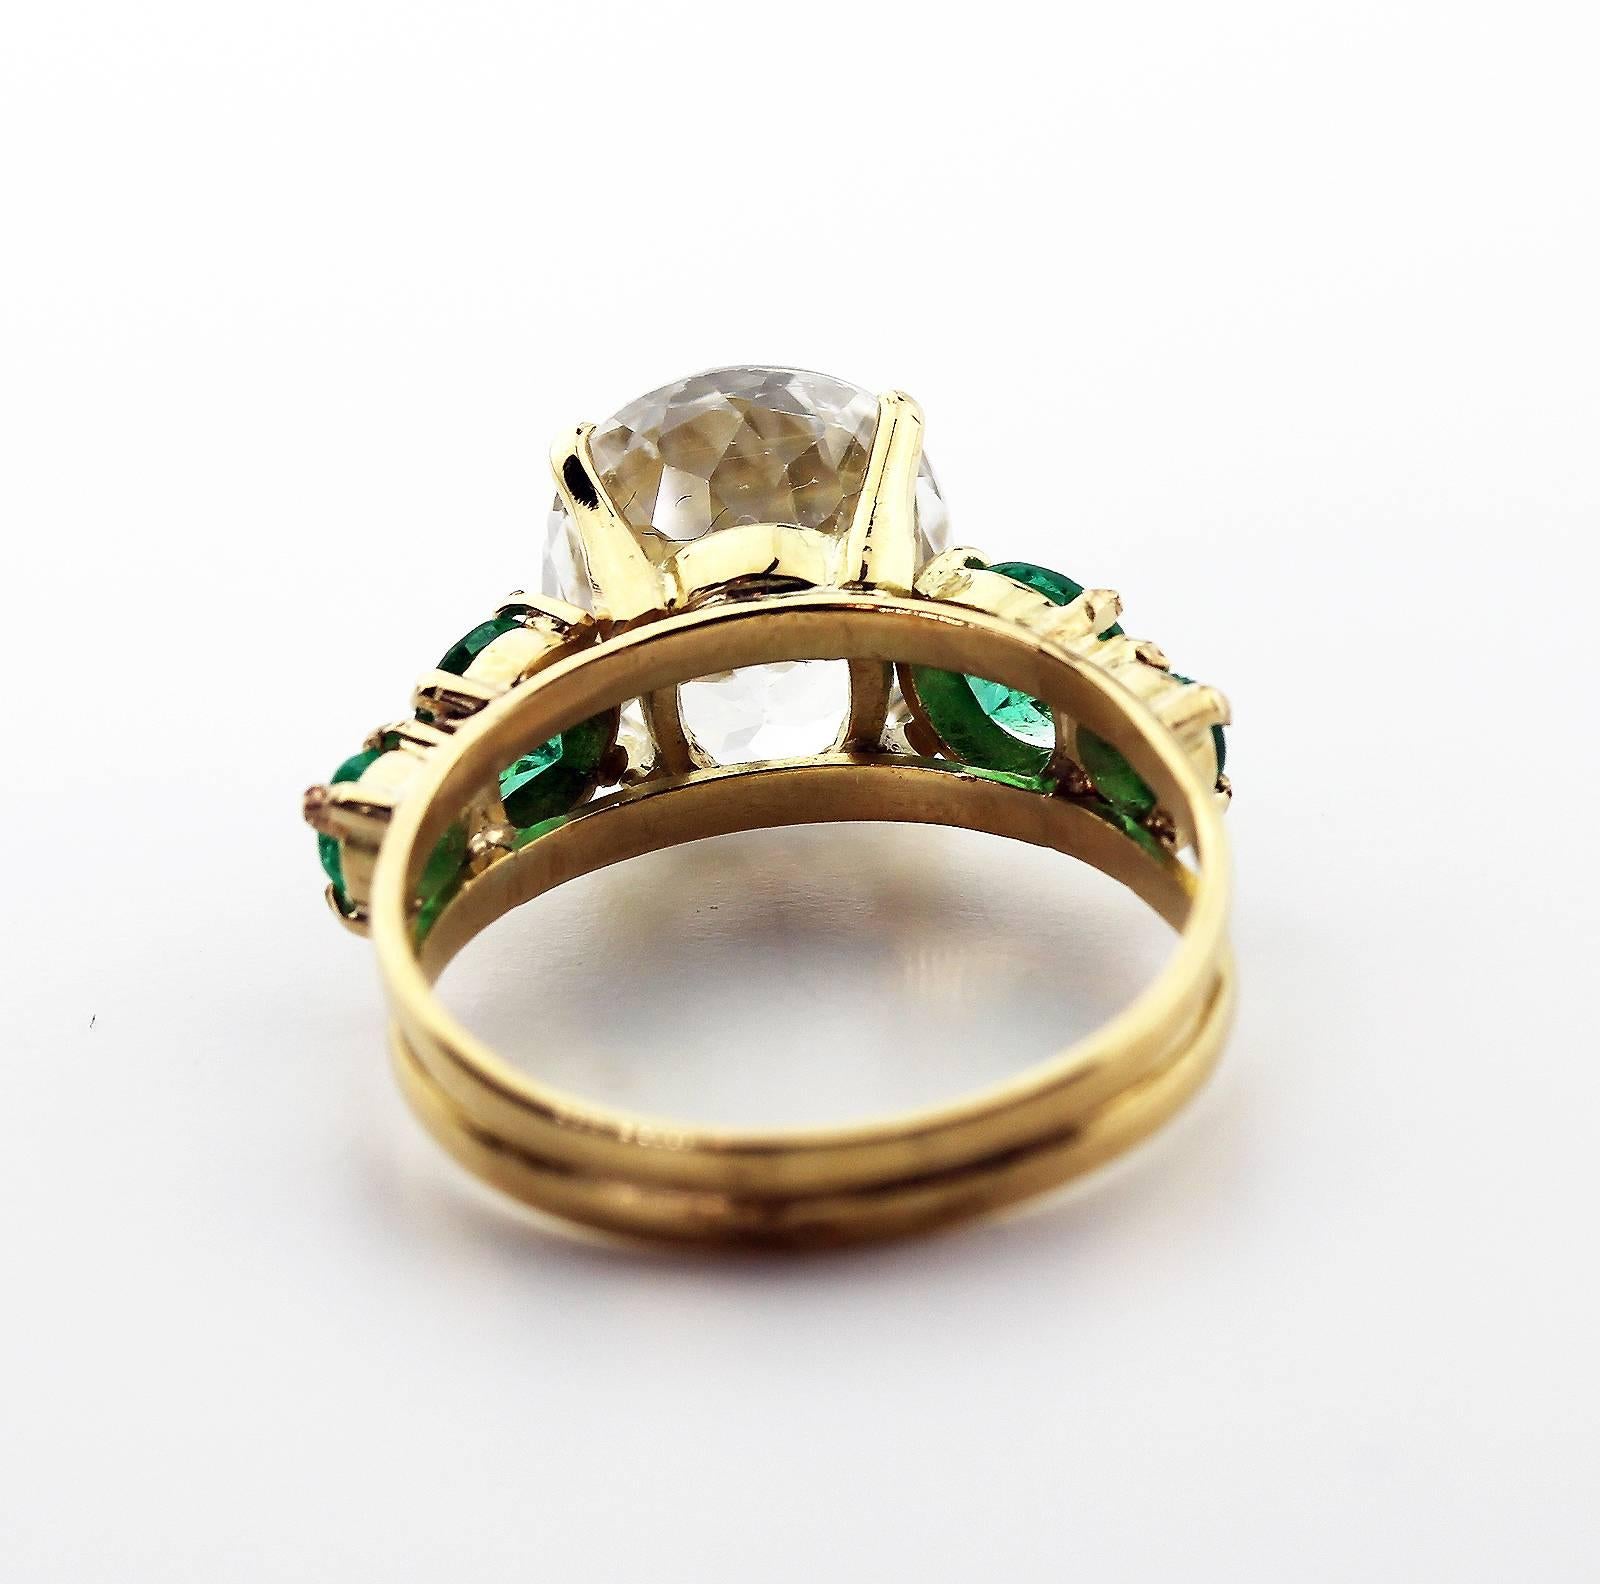 6.8 Carat White Zircon and Emerald 18Kt Yellow Gold Ring 1